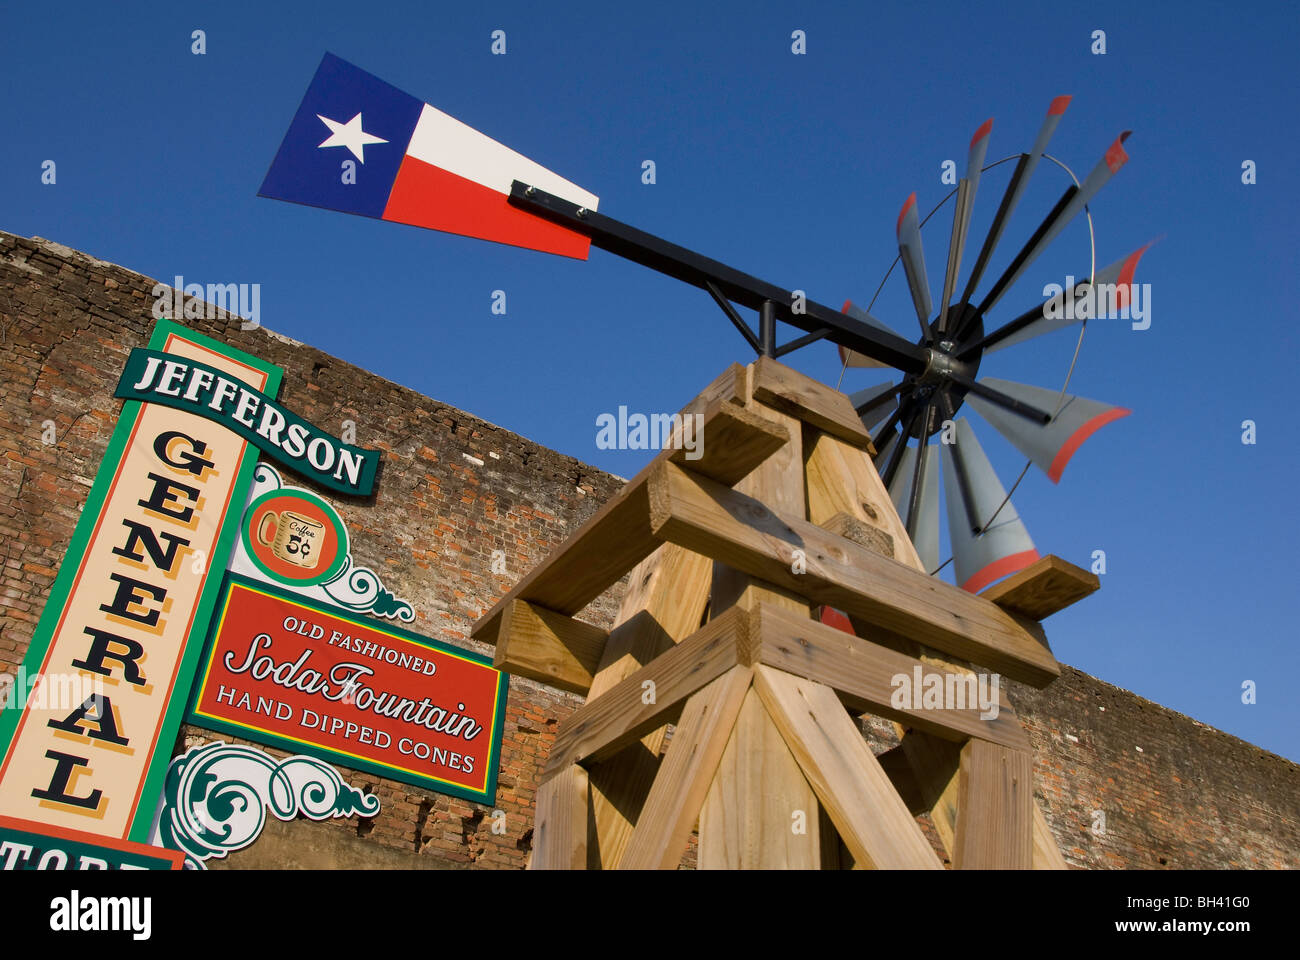 Wooden model windmill, tail painted with Texas state flag in Jefferson, Texas, USA Stock Photo